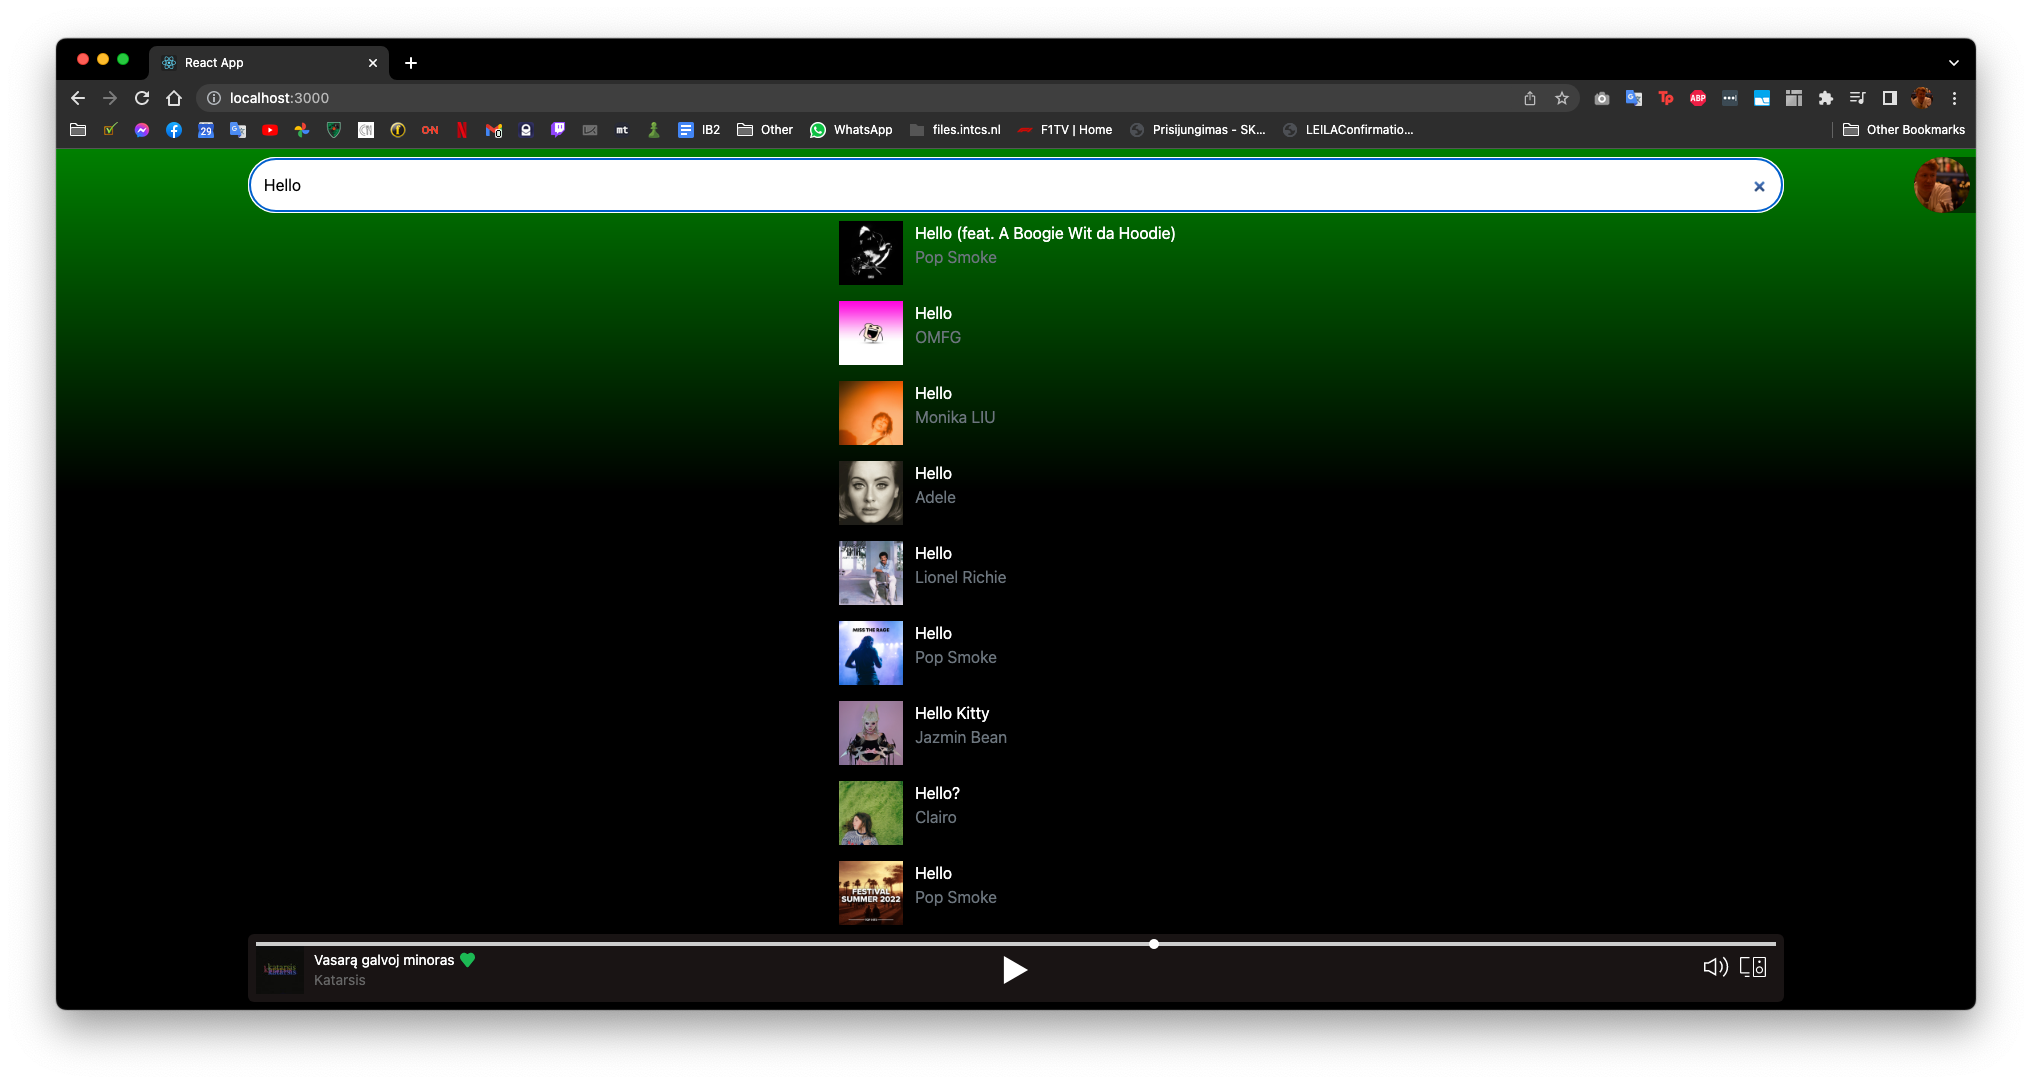 Spotify Search example